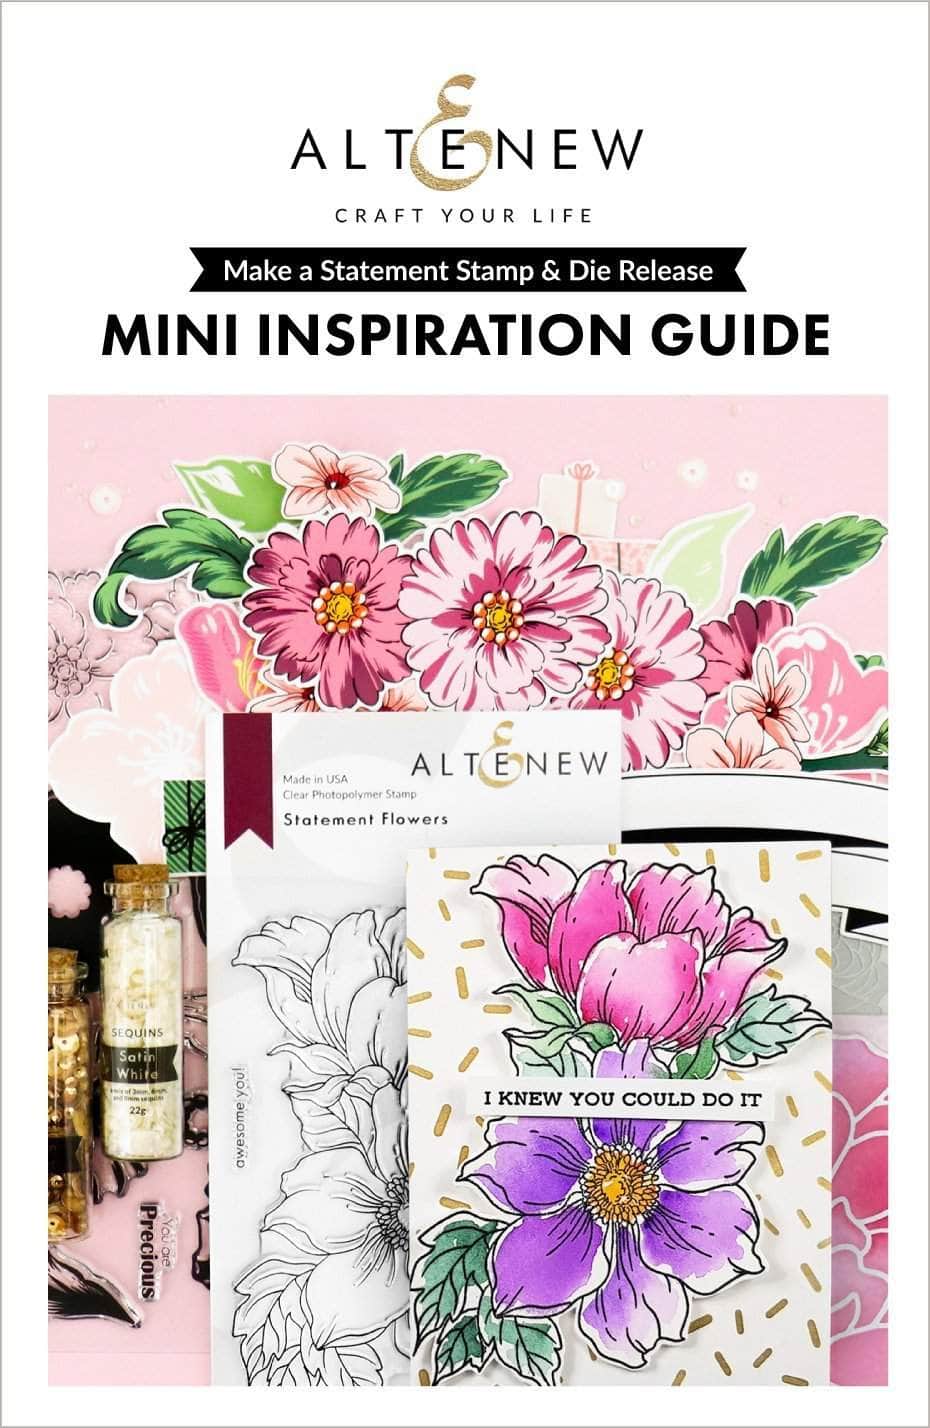 Printed Media Make a Statement Stamp & Die Release Mini Inspiration Guide